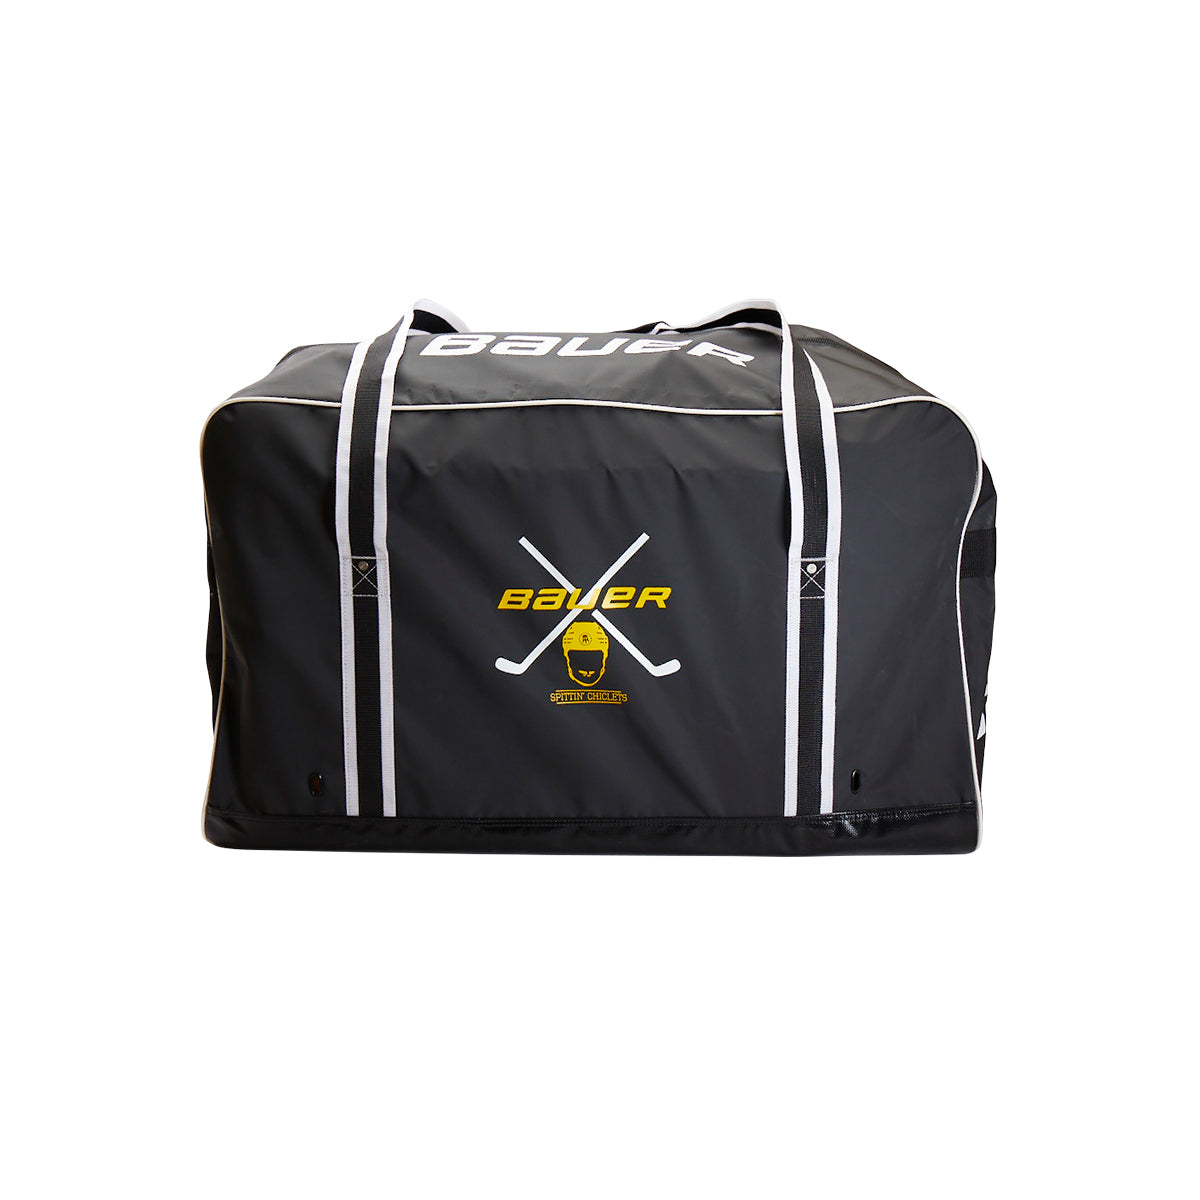 Spittin' Chiclets x BAUER Carry Bag-Accessories-Spittin Chiclets-One Size-Black-Barstool Sports